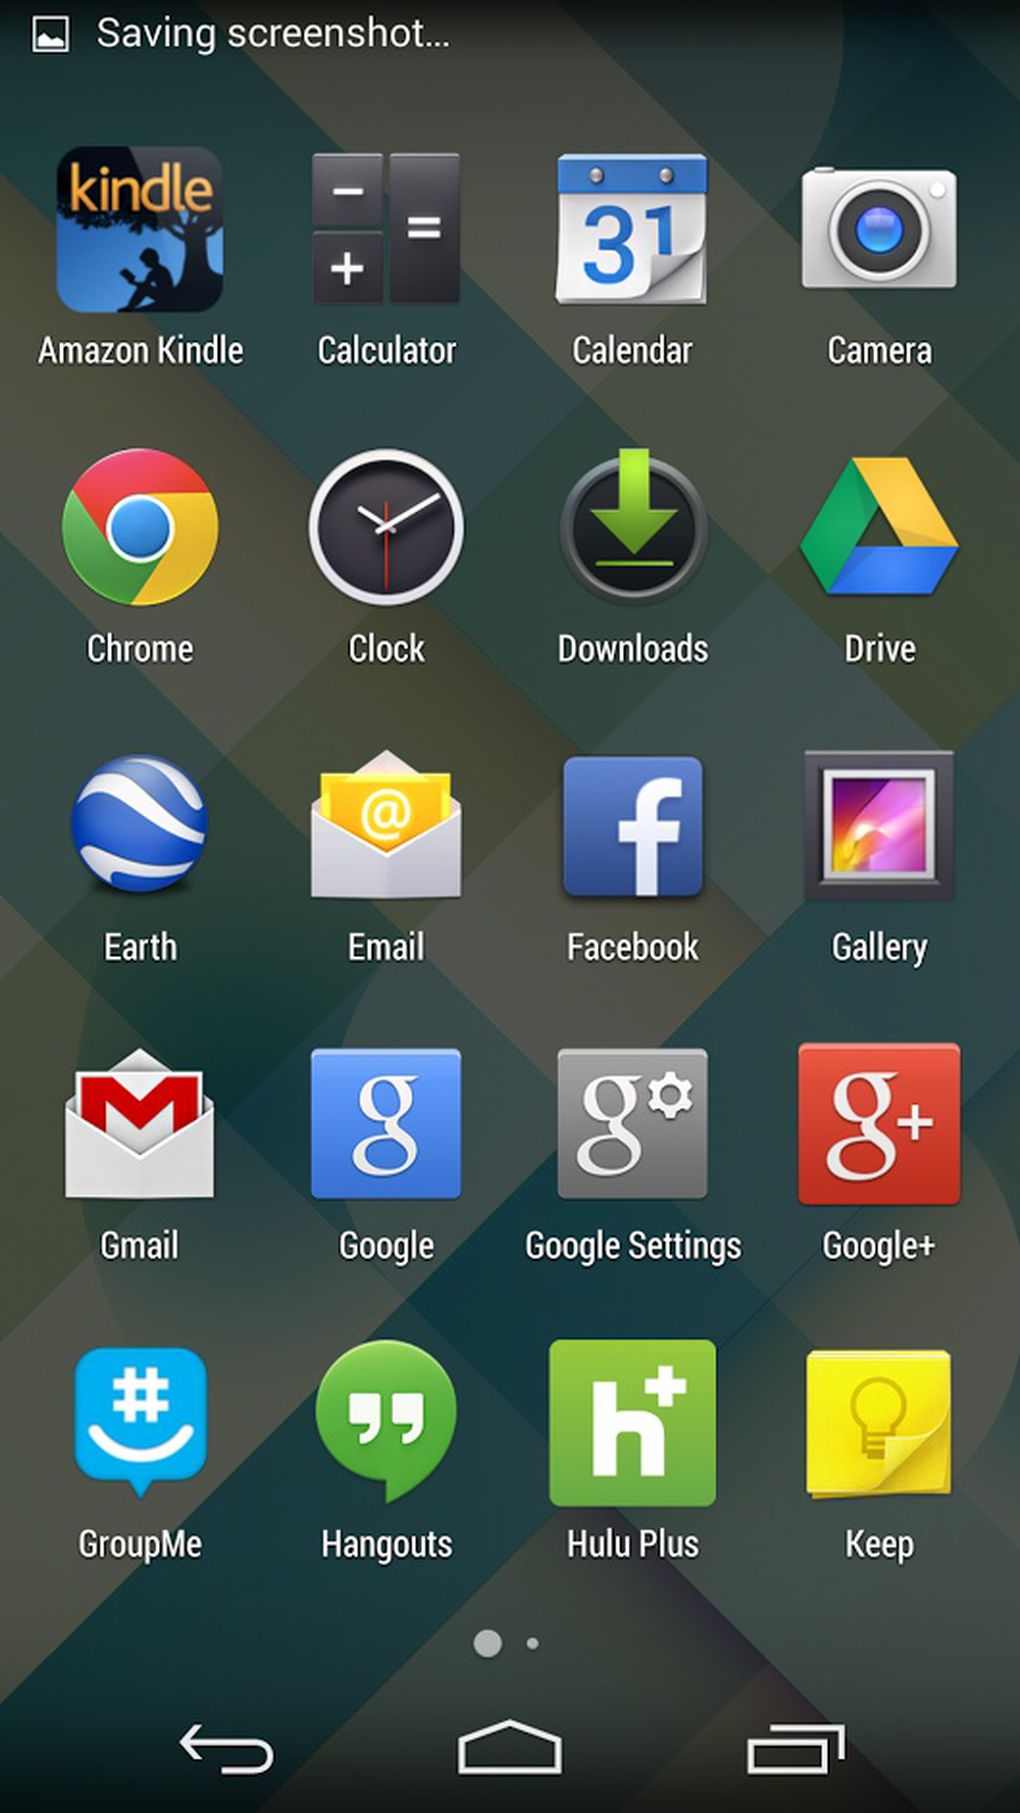 android mobile os software download